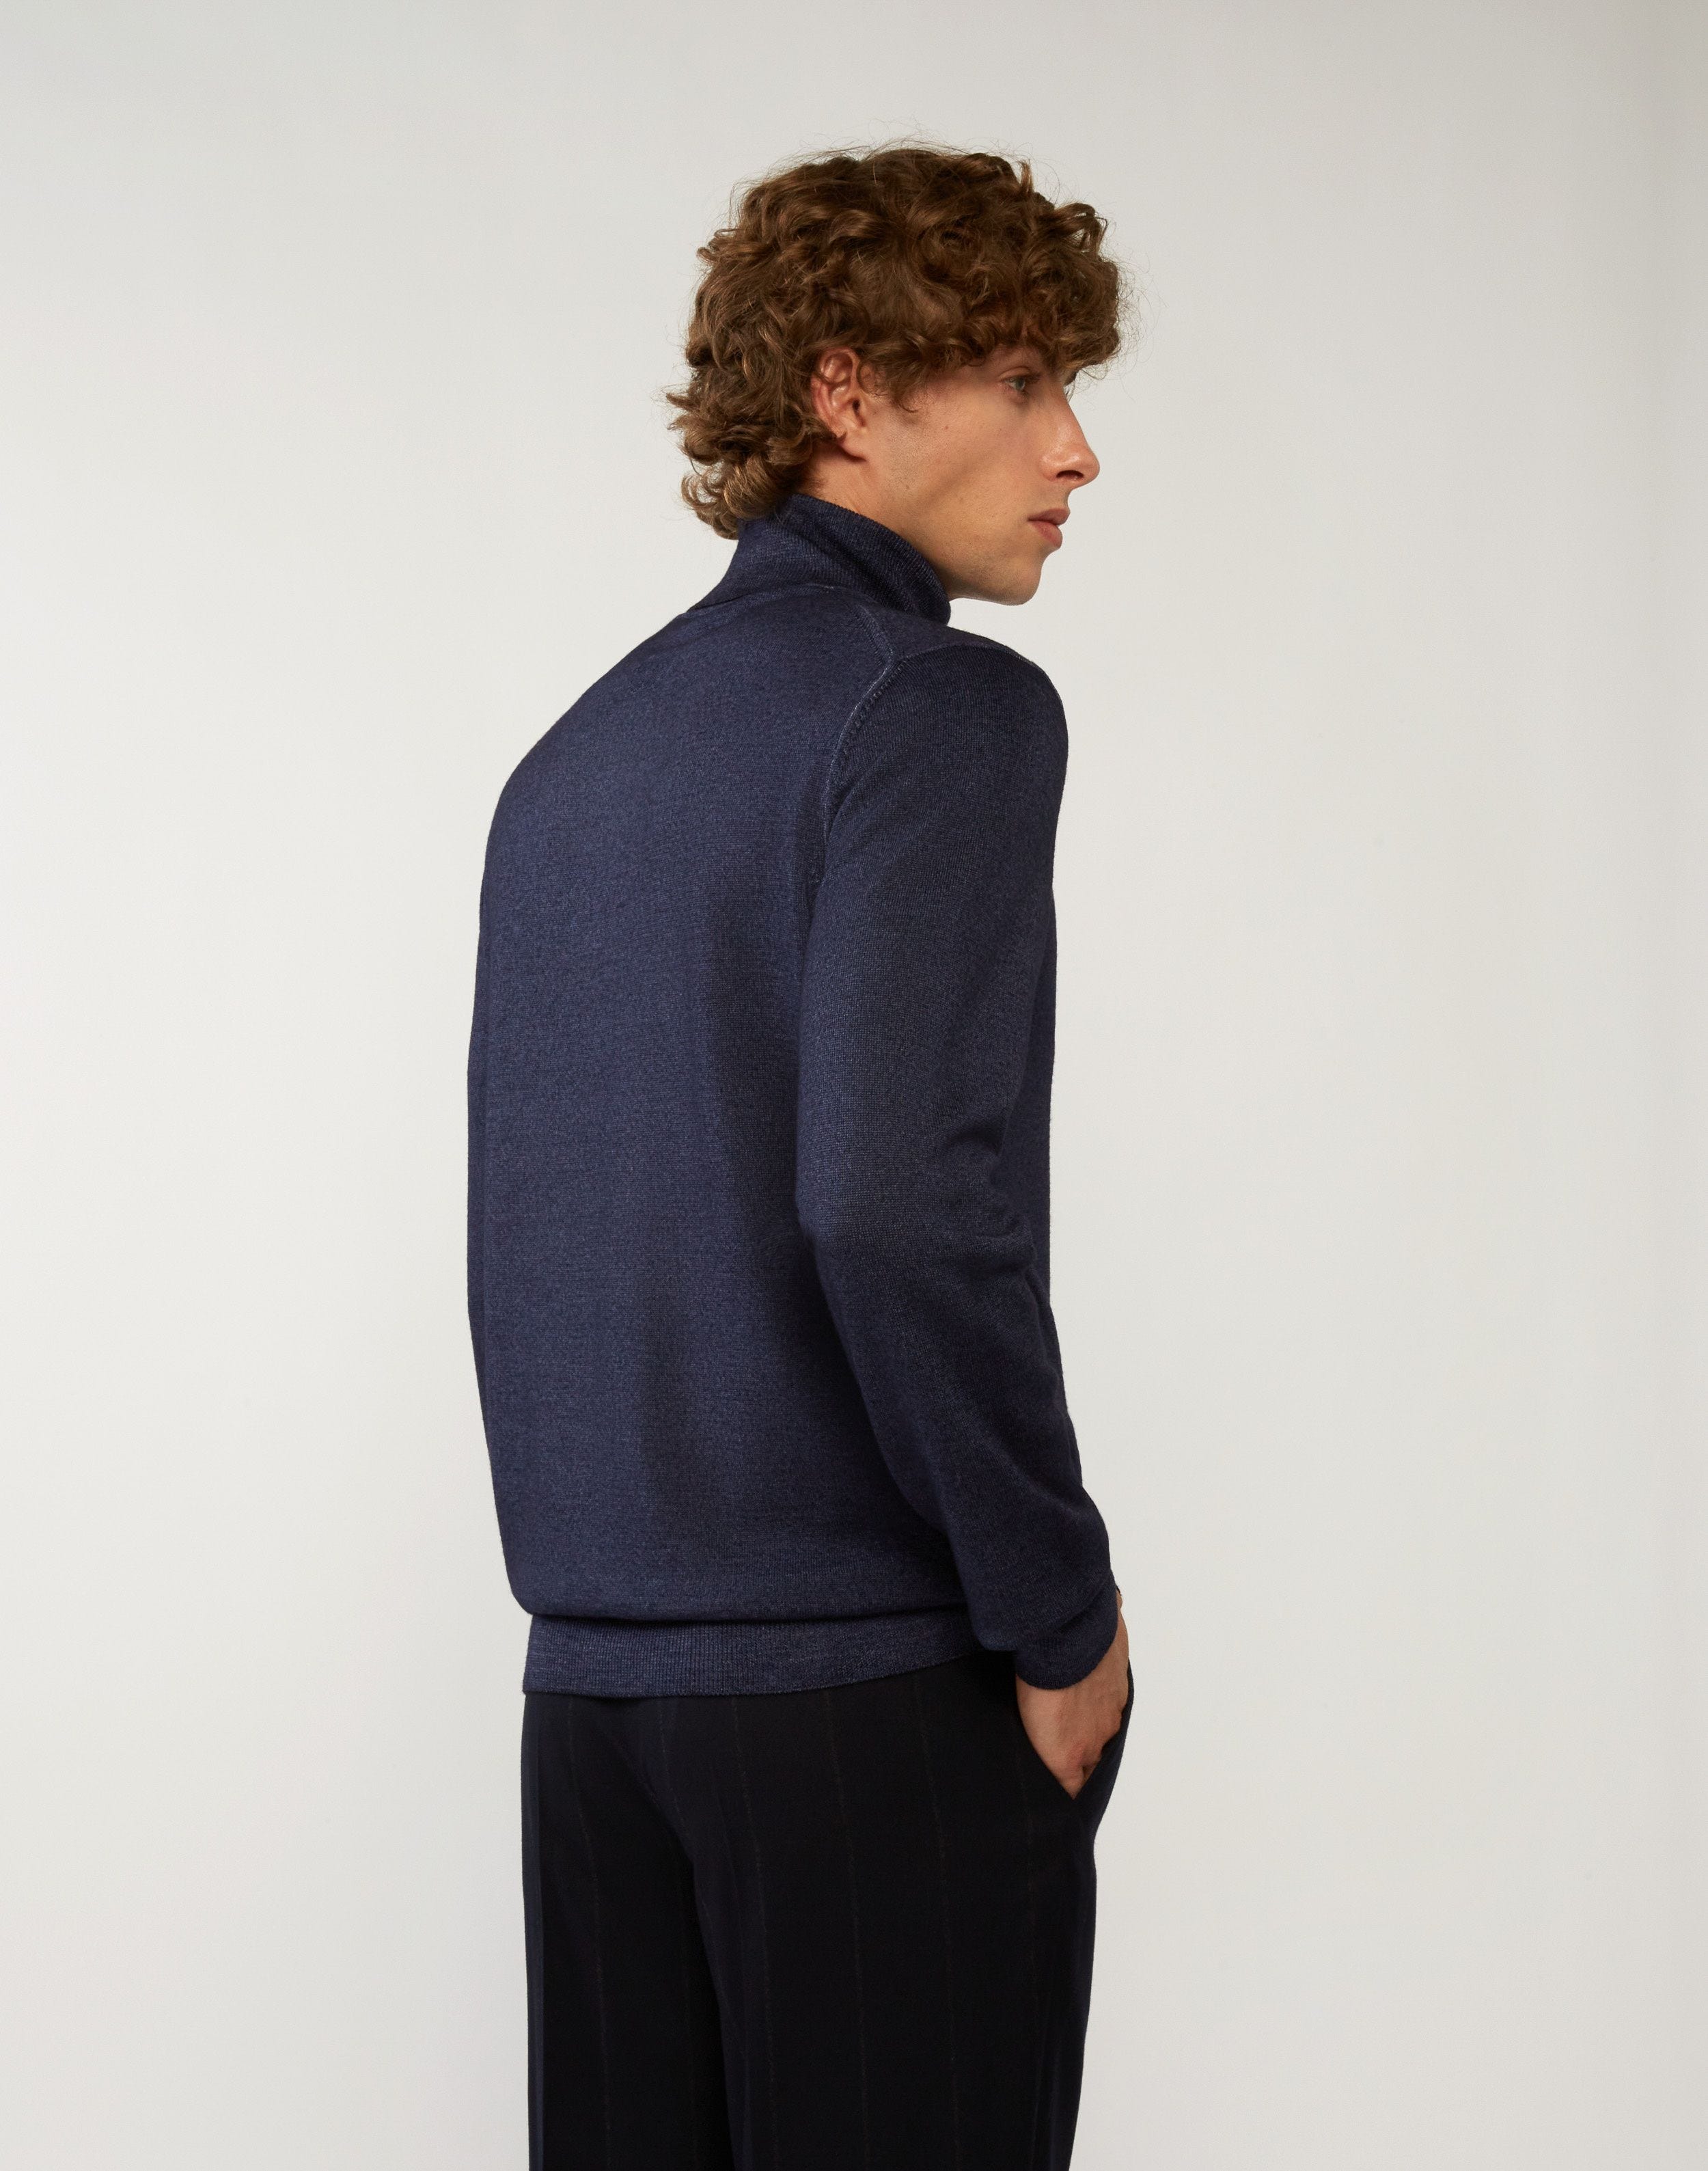 Turtleneck in blue worsted wool